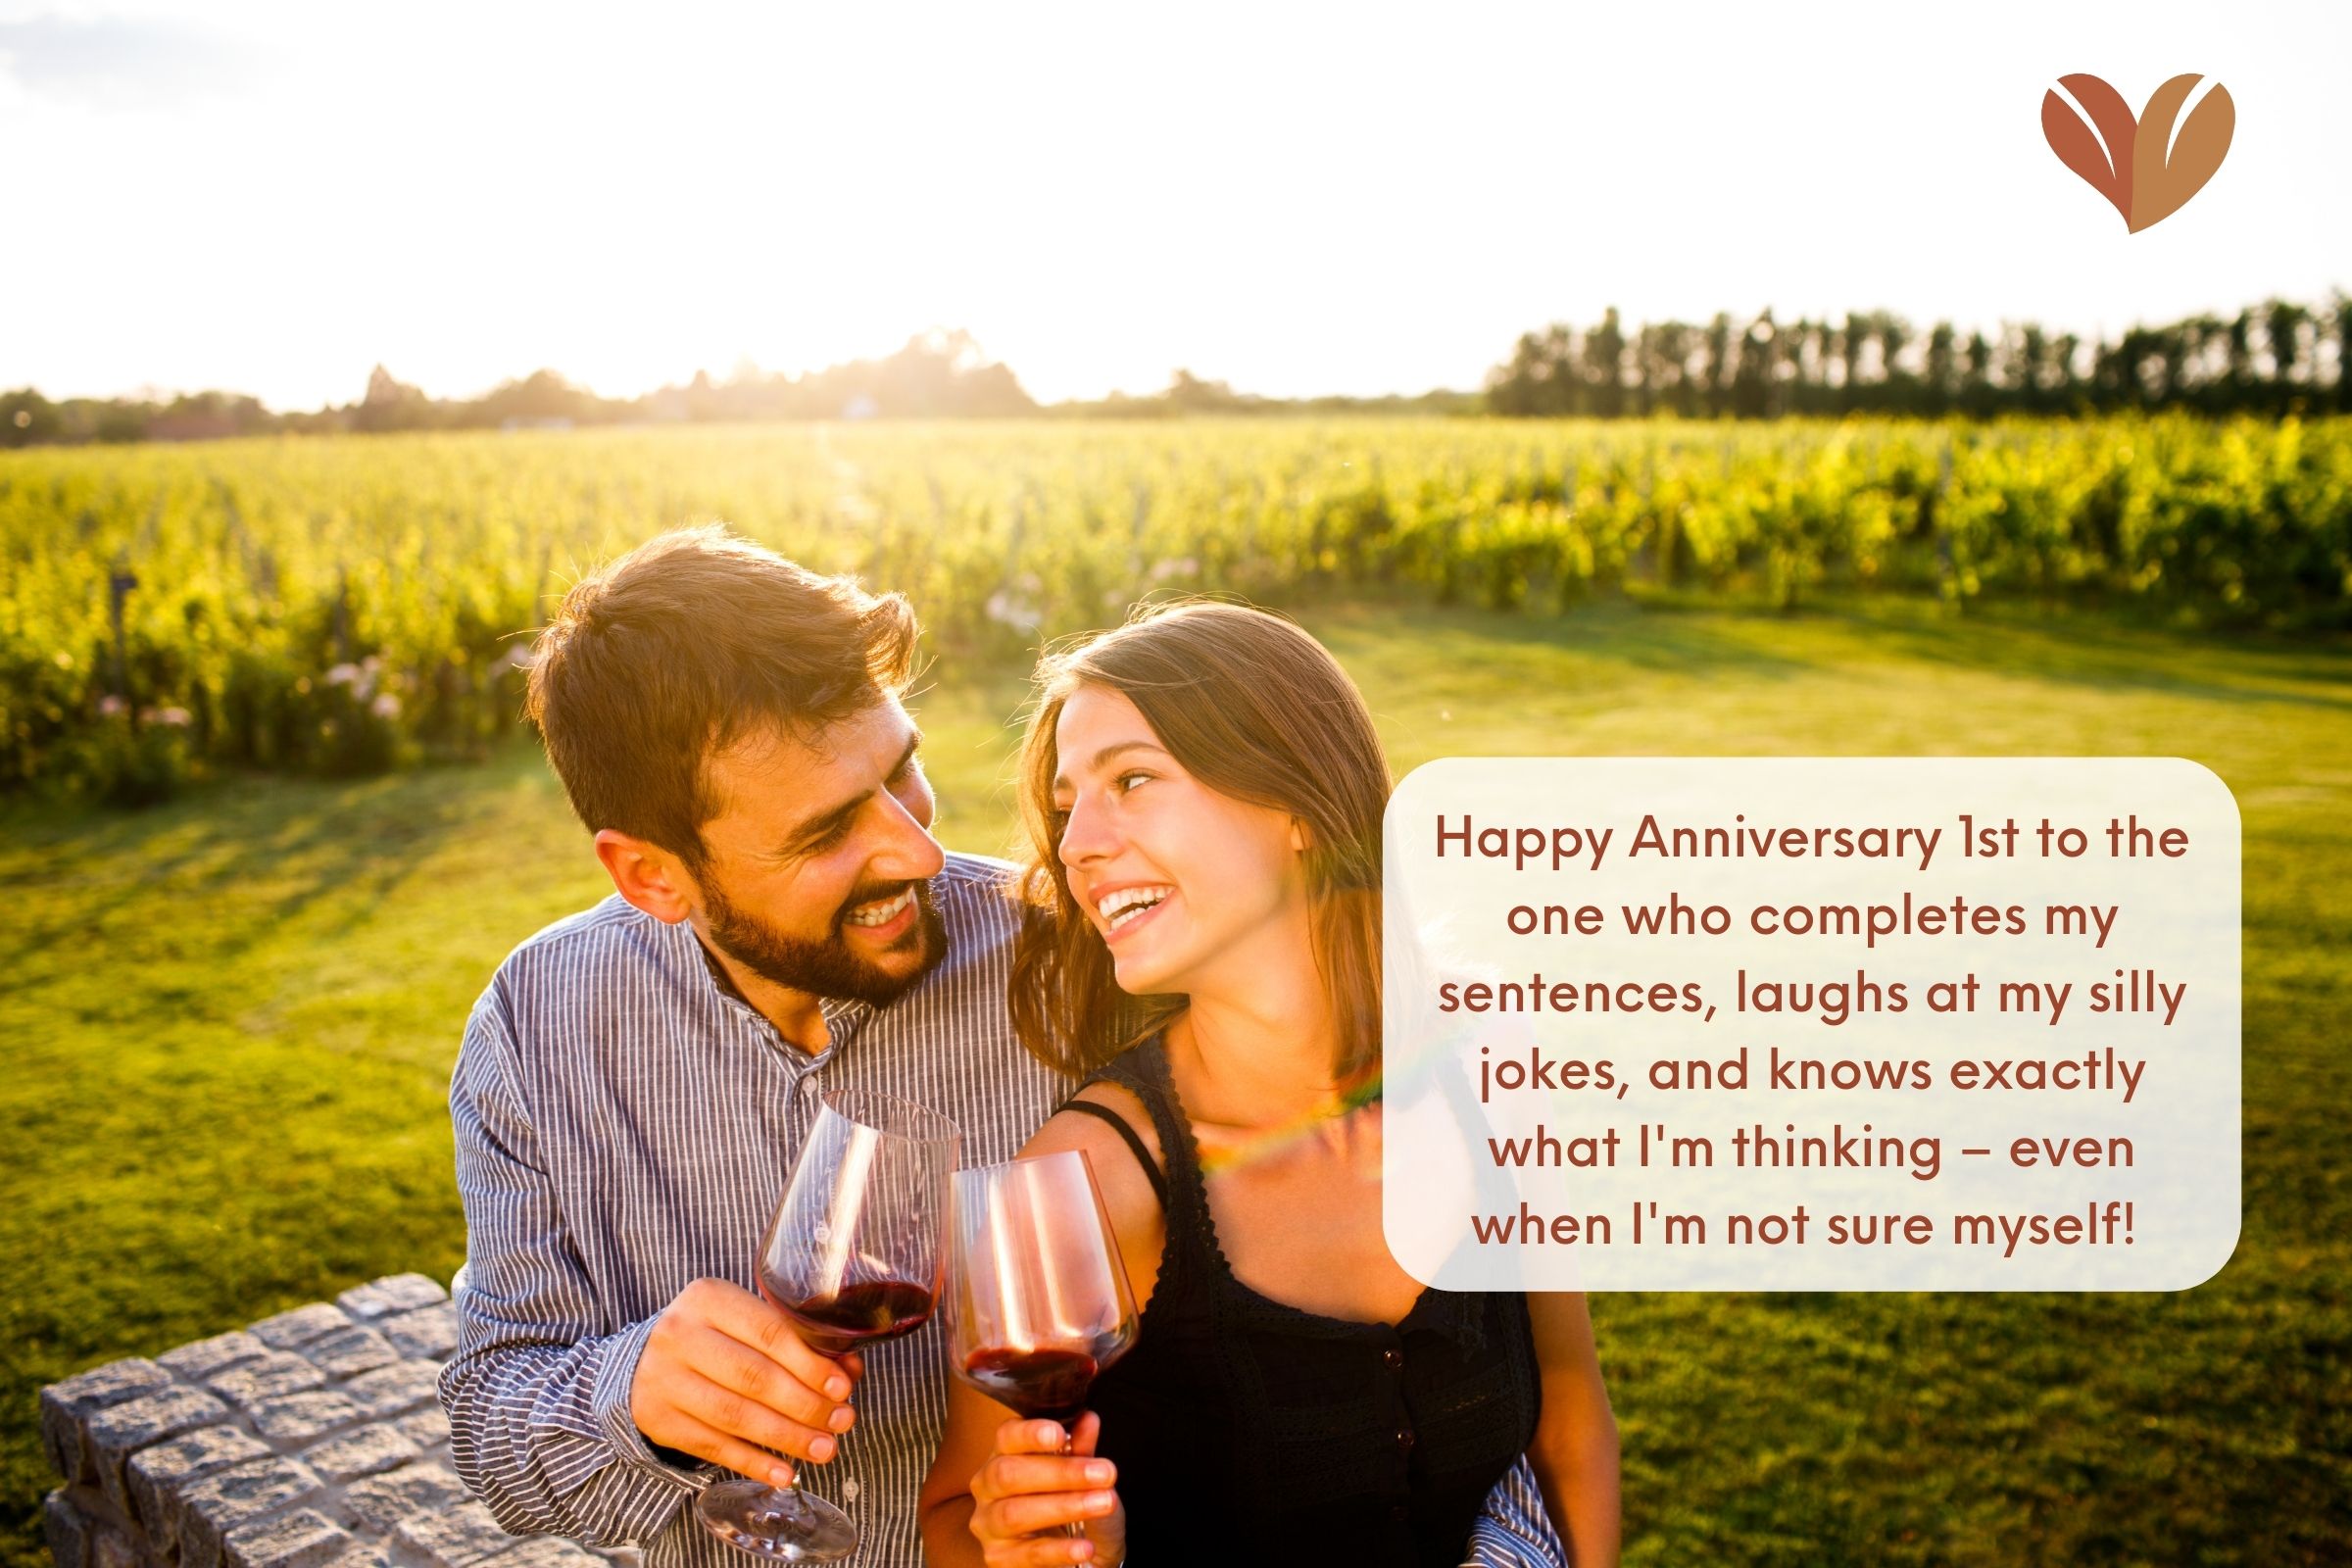 Funny wishes for happy 1st anniversary